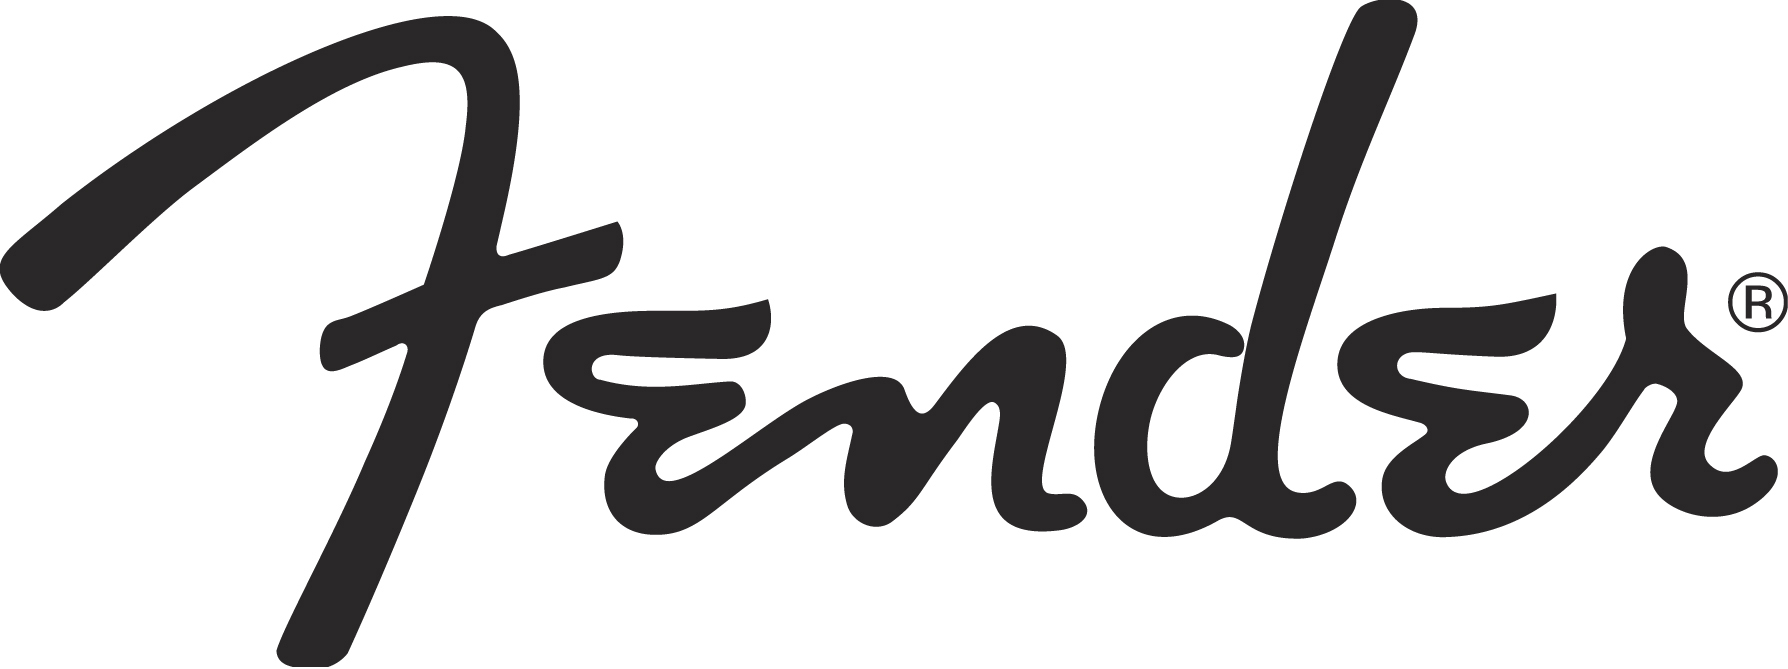 Fender Press Releases & Products Updates.